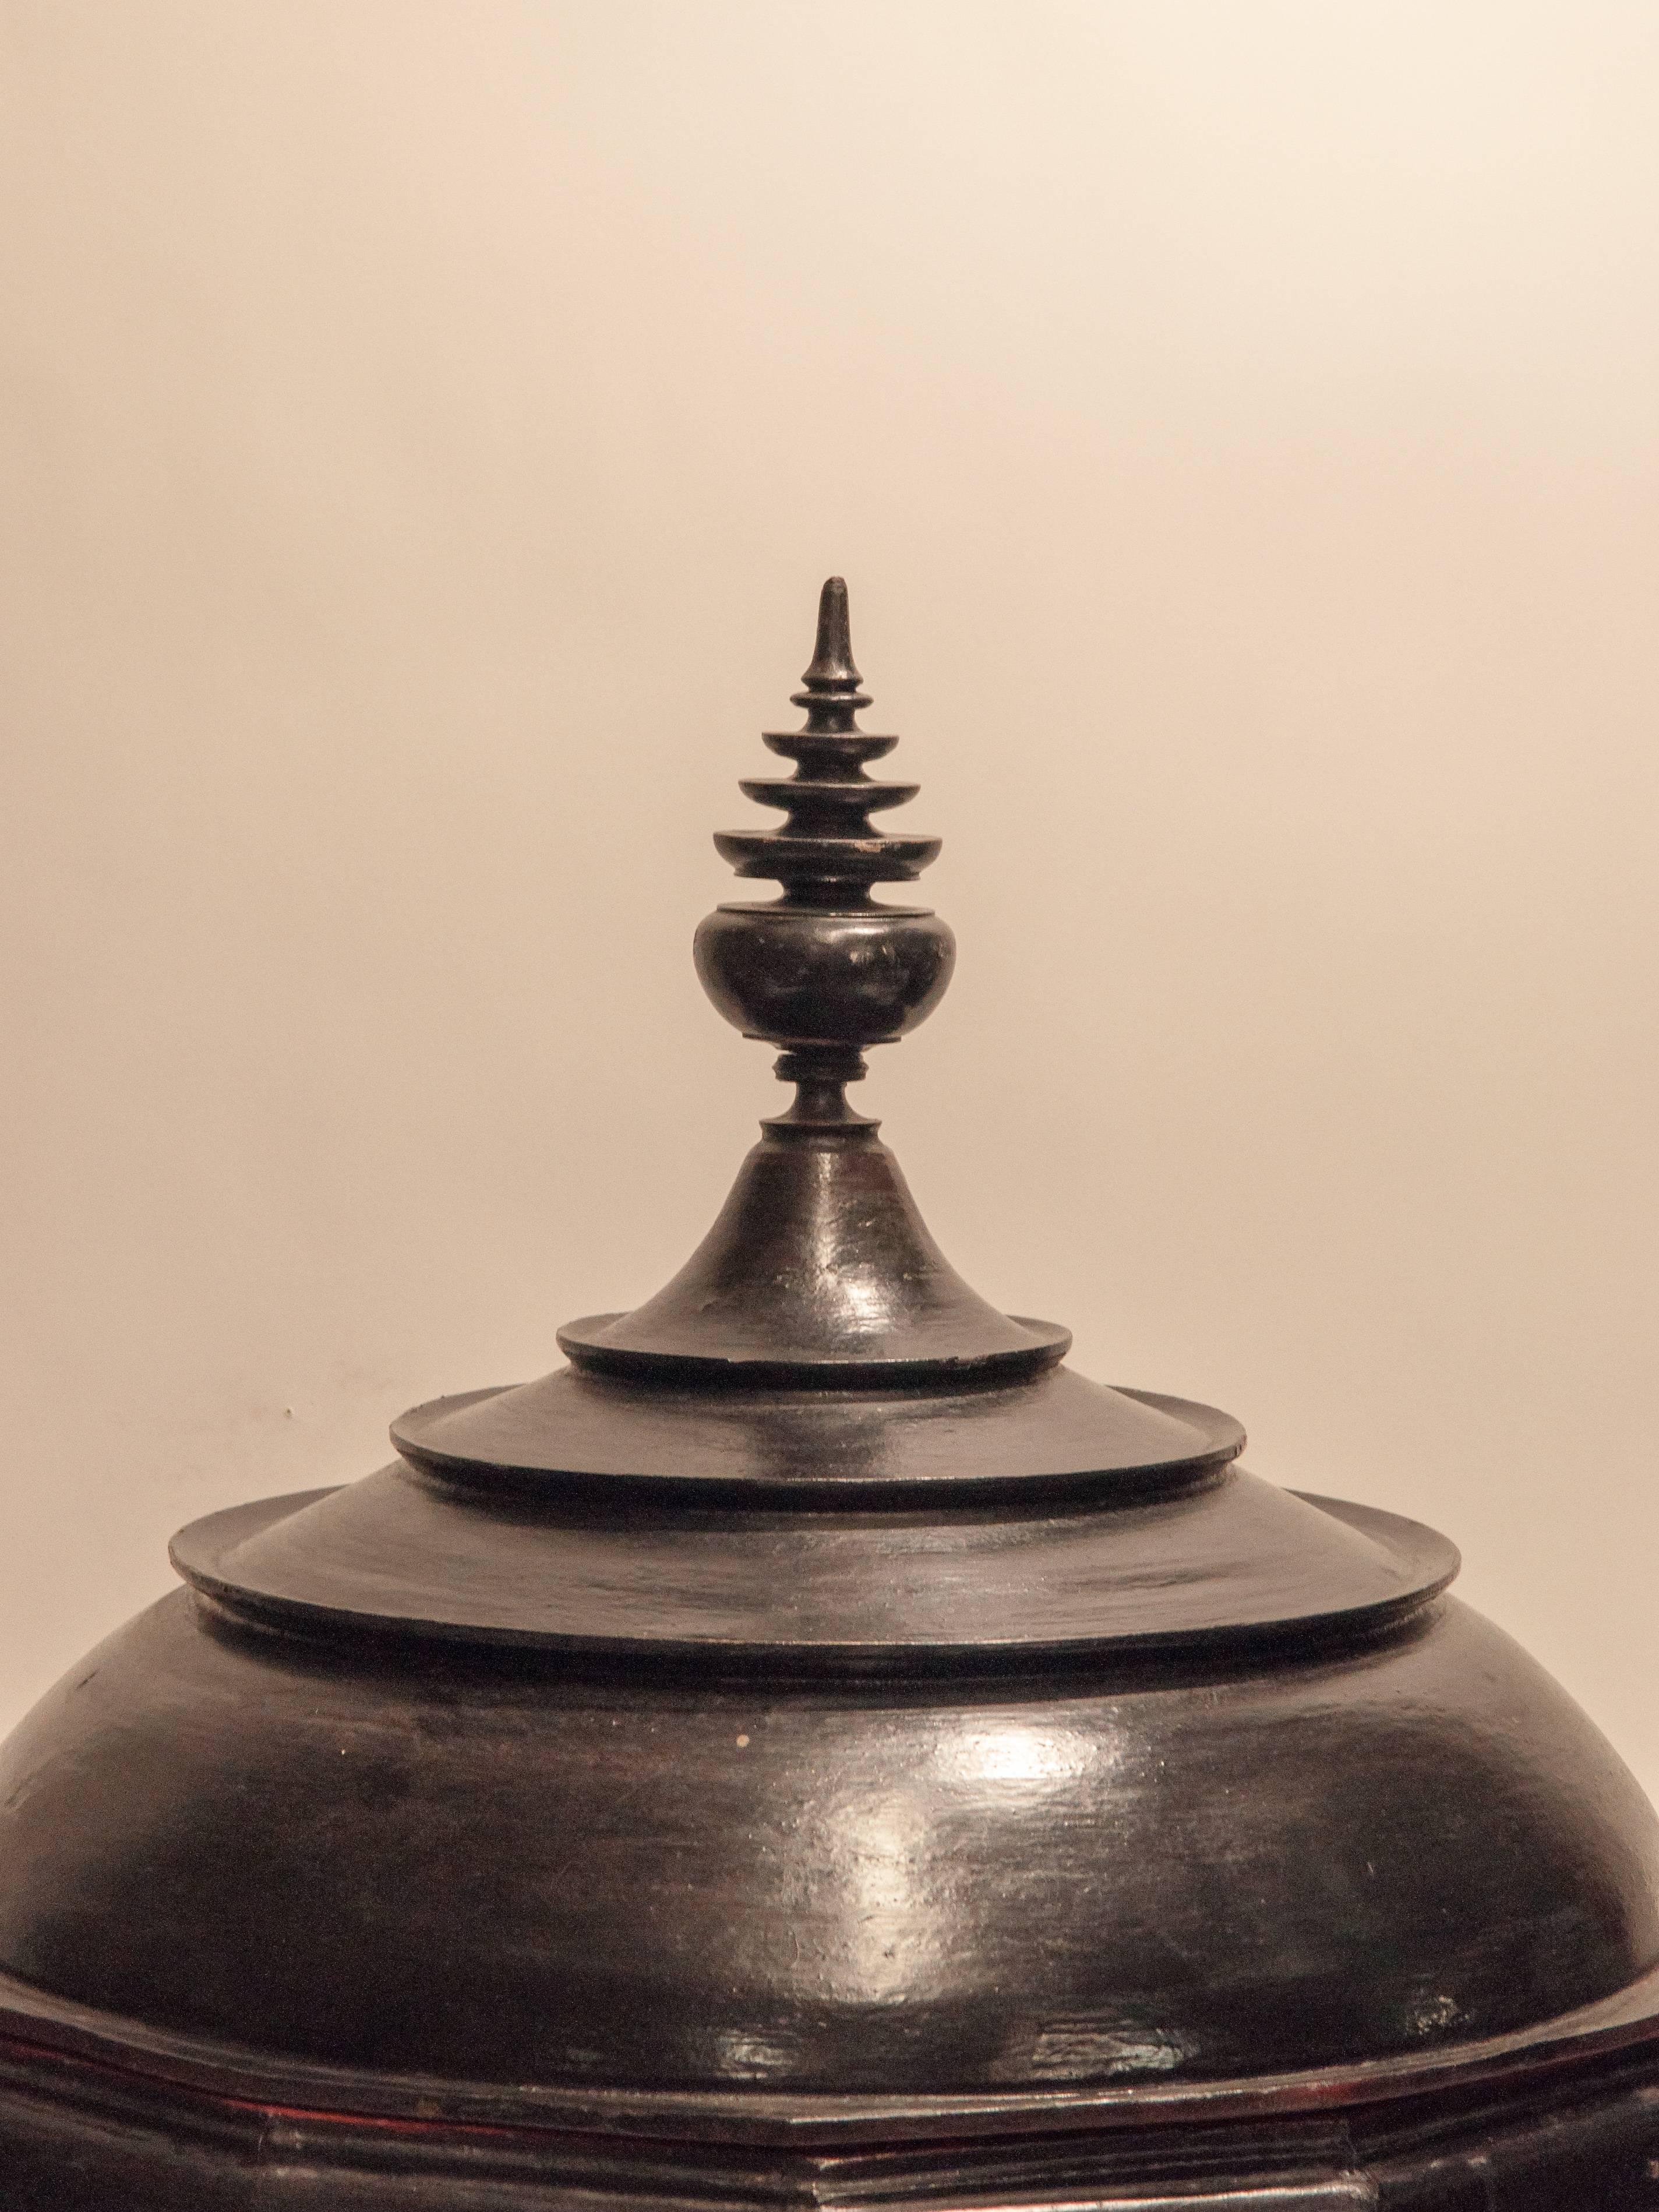 Extraordinarily large black lacquer offering tray, hsun ok, from Burma. Incorporating six carved claw-and-ball foot legs, a large domed lid and turned pagoda like finial. Early to Mid-20th century.
This six sided piece is made of bamboo and teak,